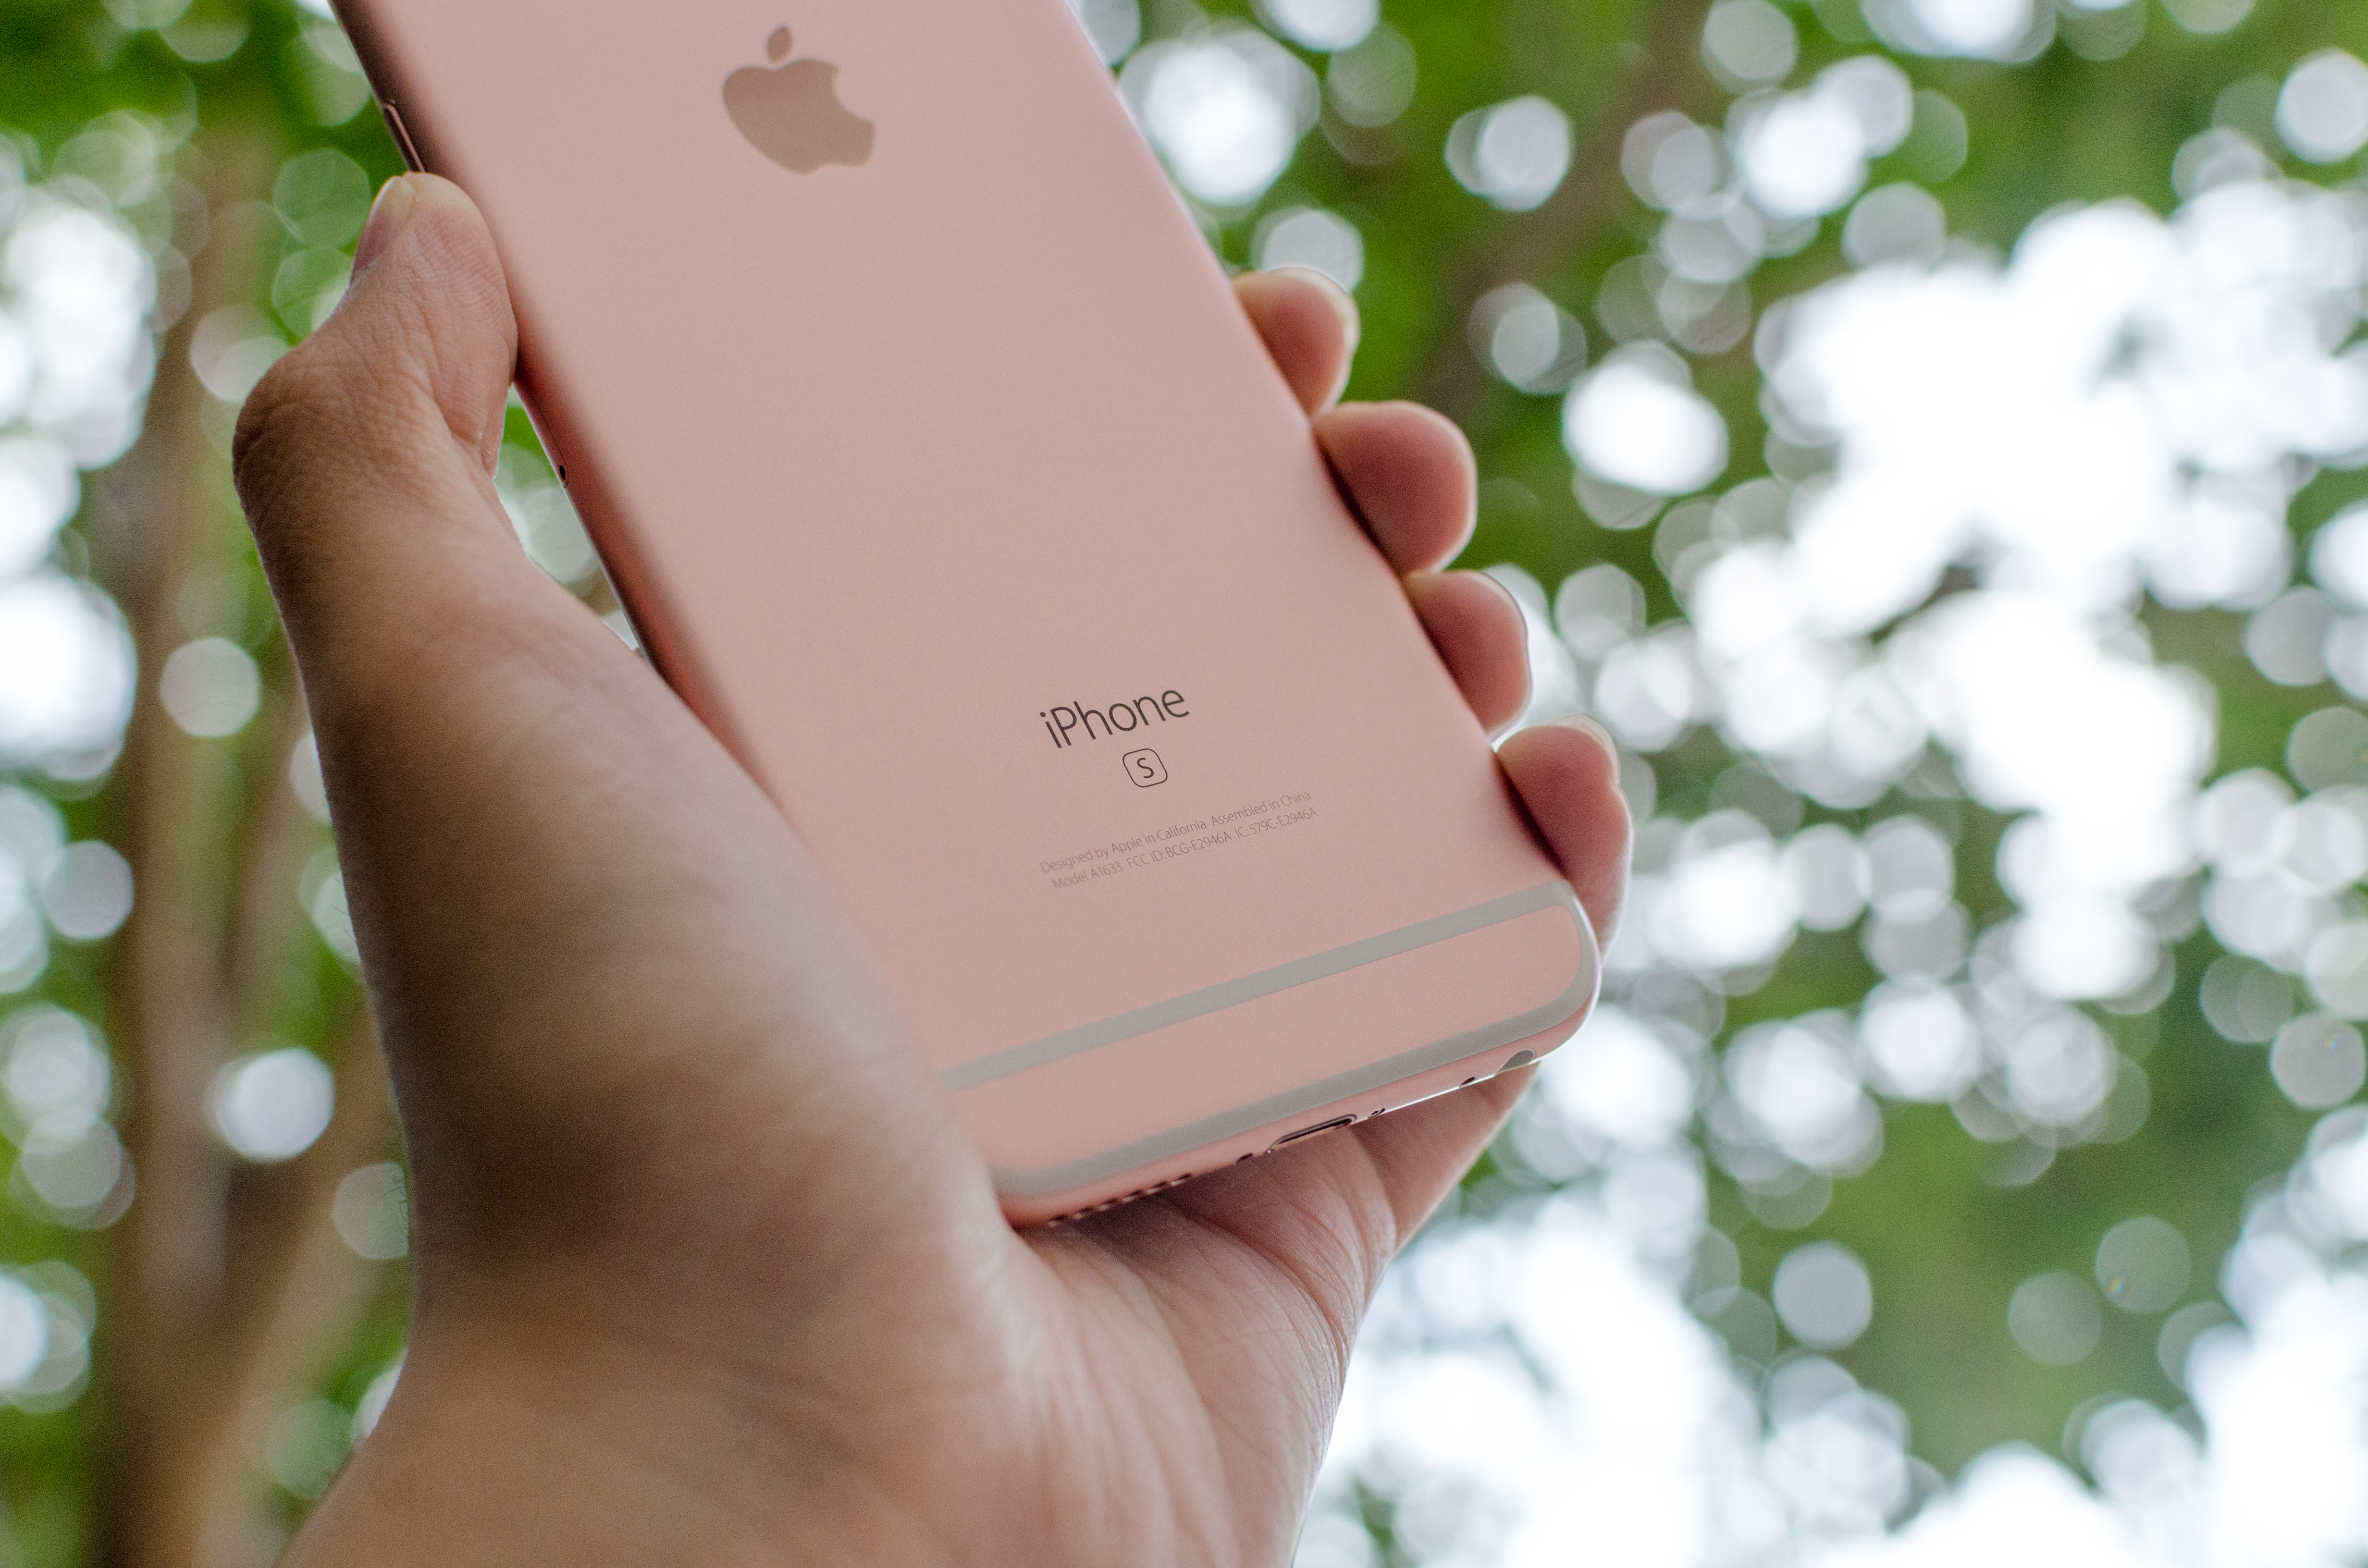 iPhone 6s and iPhone 6s Plus Preliminary Results